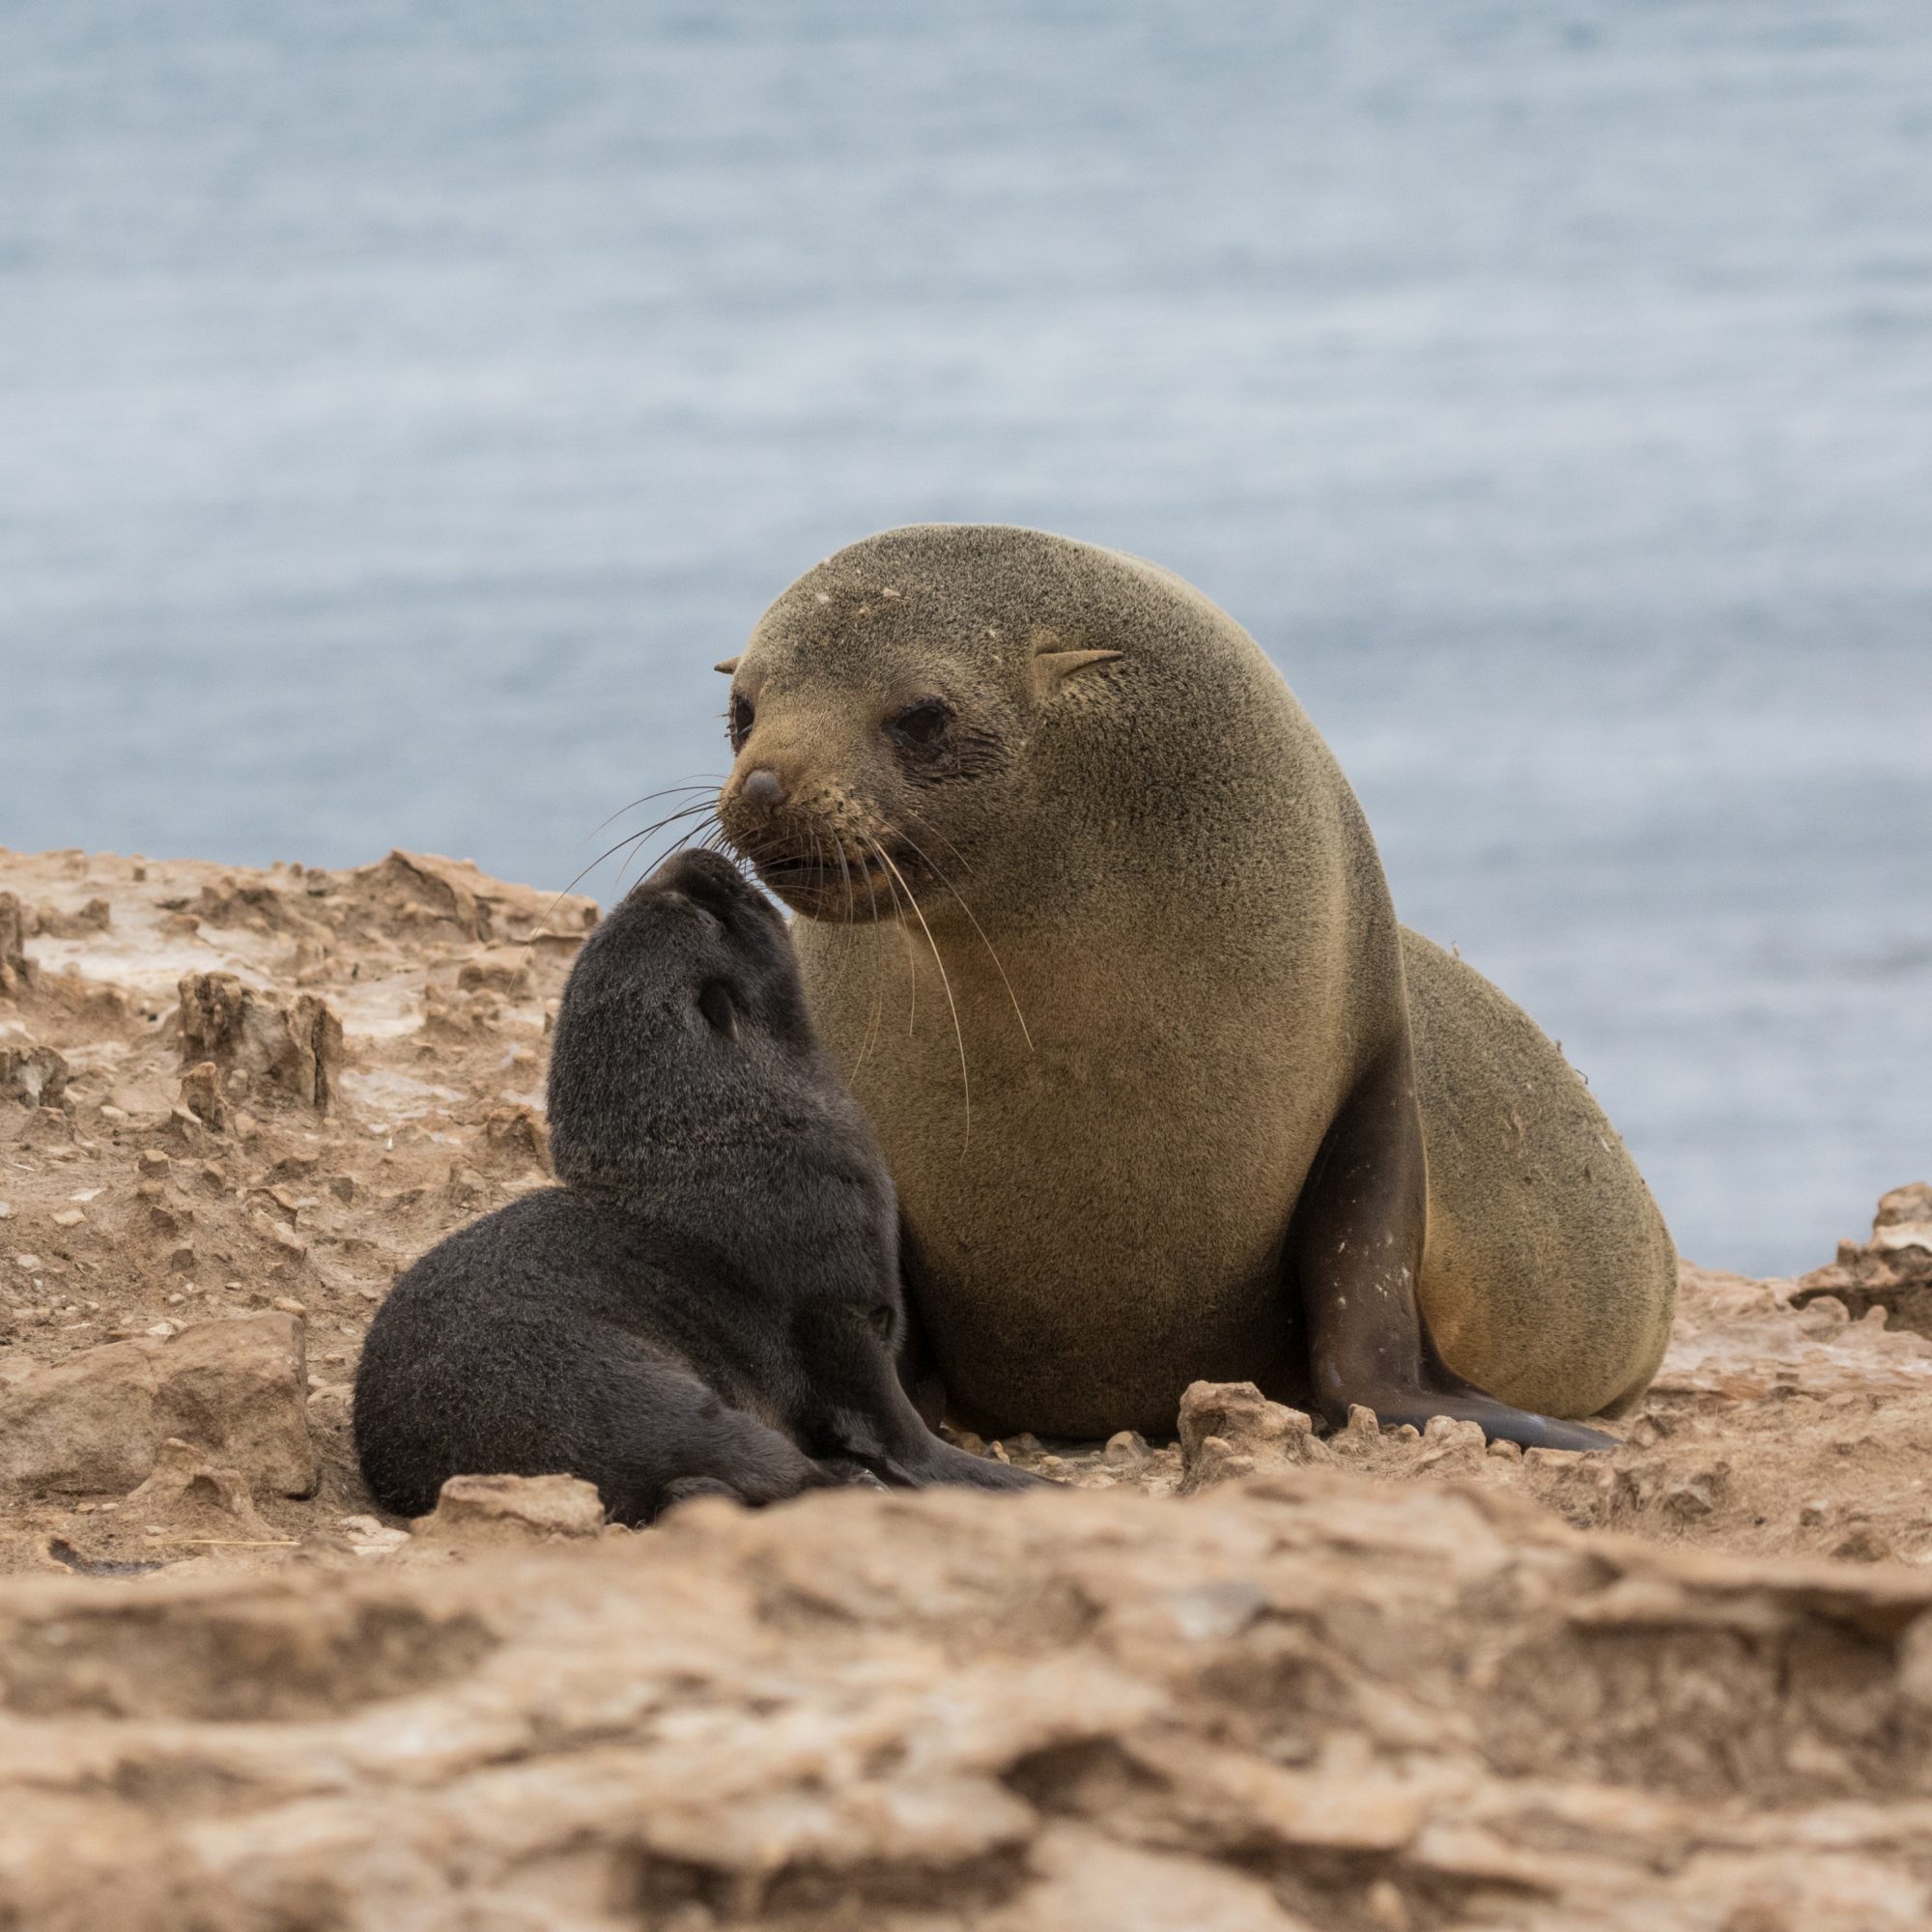 South American Fur Seals and their young – Falkland Islands 2016